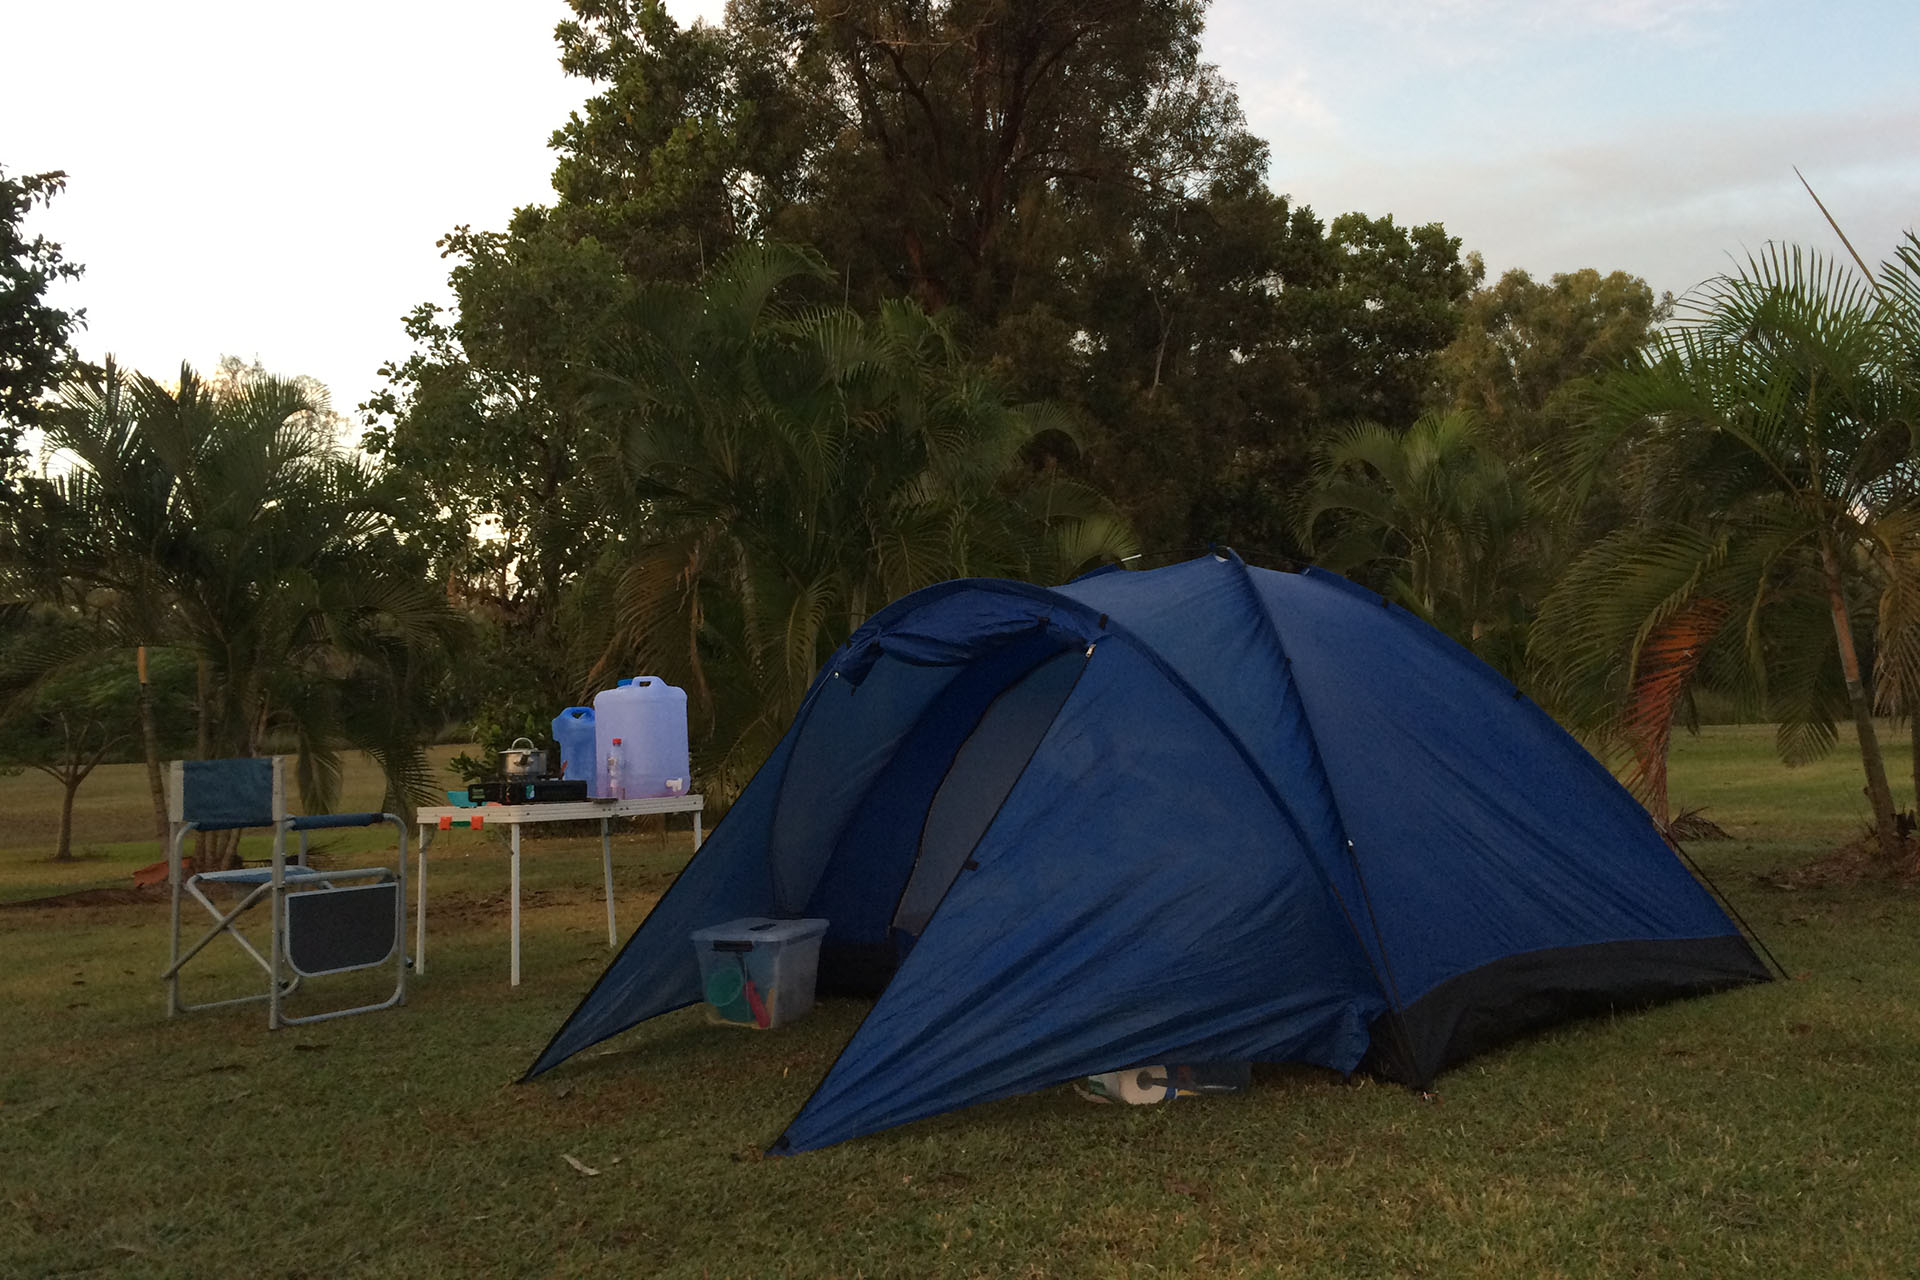 Today's camp (pictured the morning after).